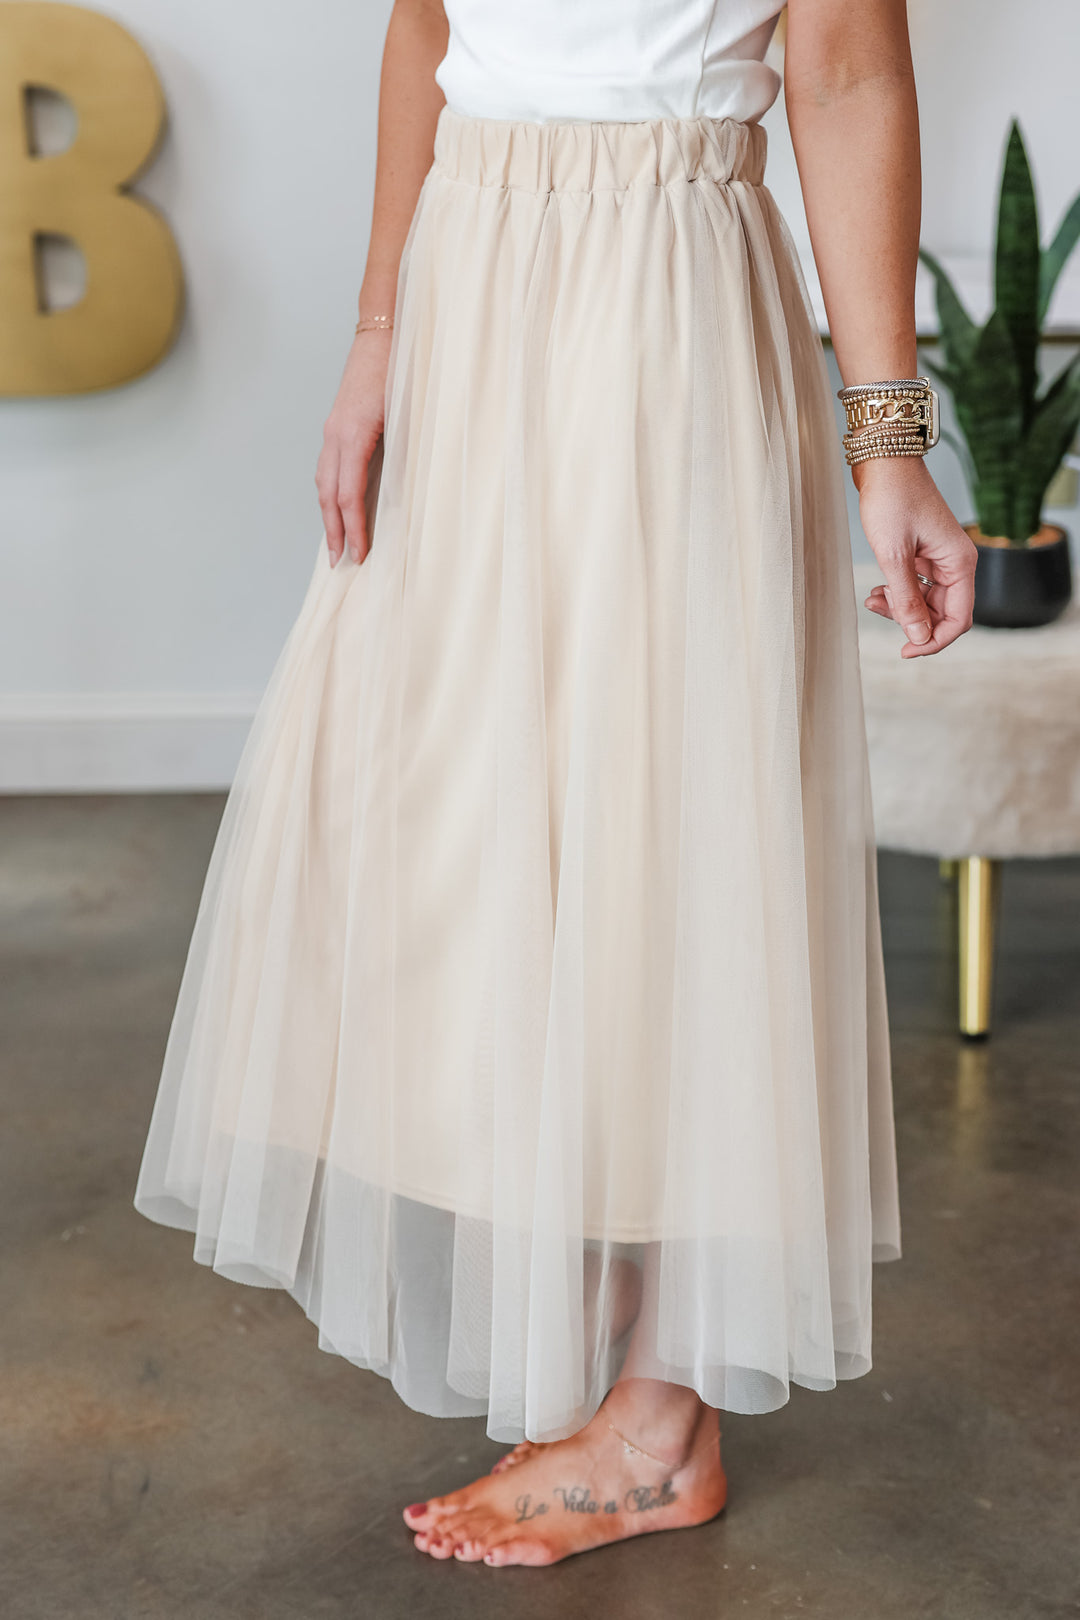 A picture of a woman standing in a shop wearing a champagne colored tulle skirt with an elastic waist